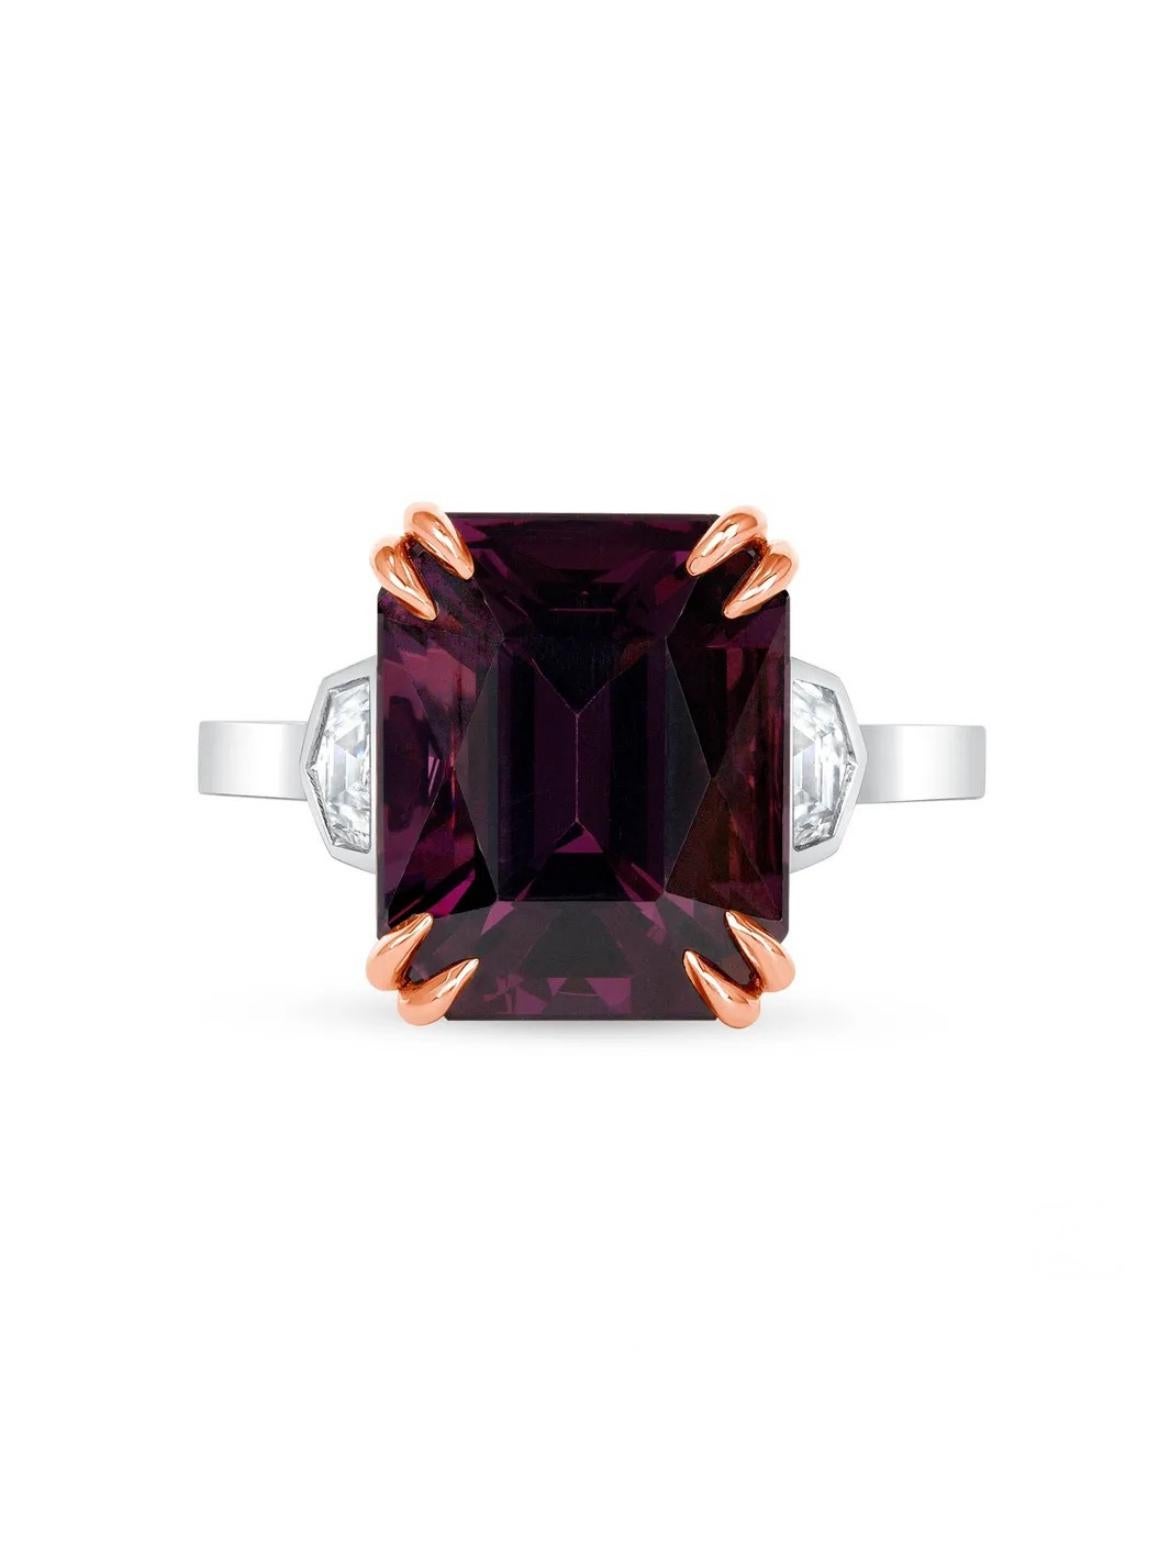 7.39-carat untreated purple Spinel, flanked by two cadillac-cut diamonds. Fabricated in 18K white with rose gold. Spinel is GIA certified. 

Spinel is generally highly sought after by gem connoisseurs, and well-formed spinel crystals are in high